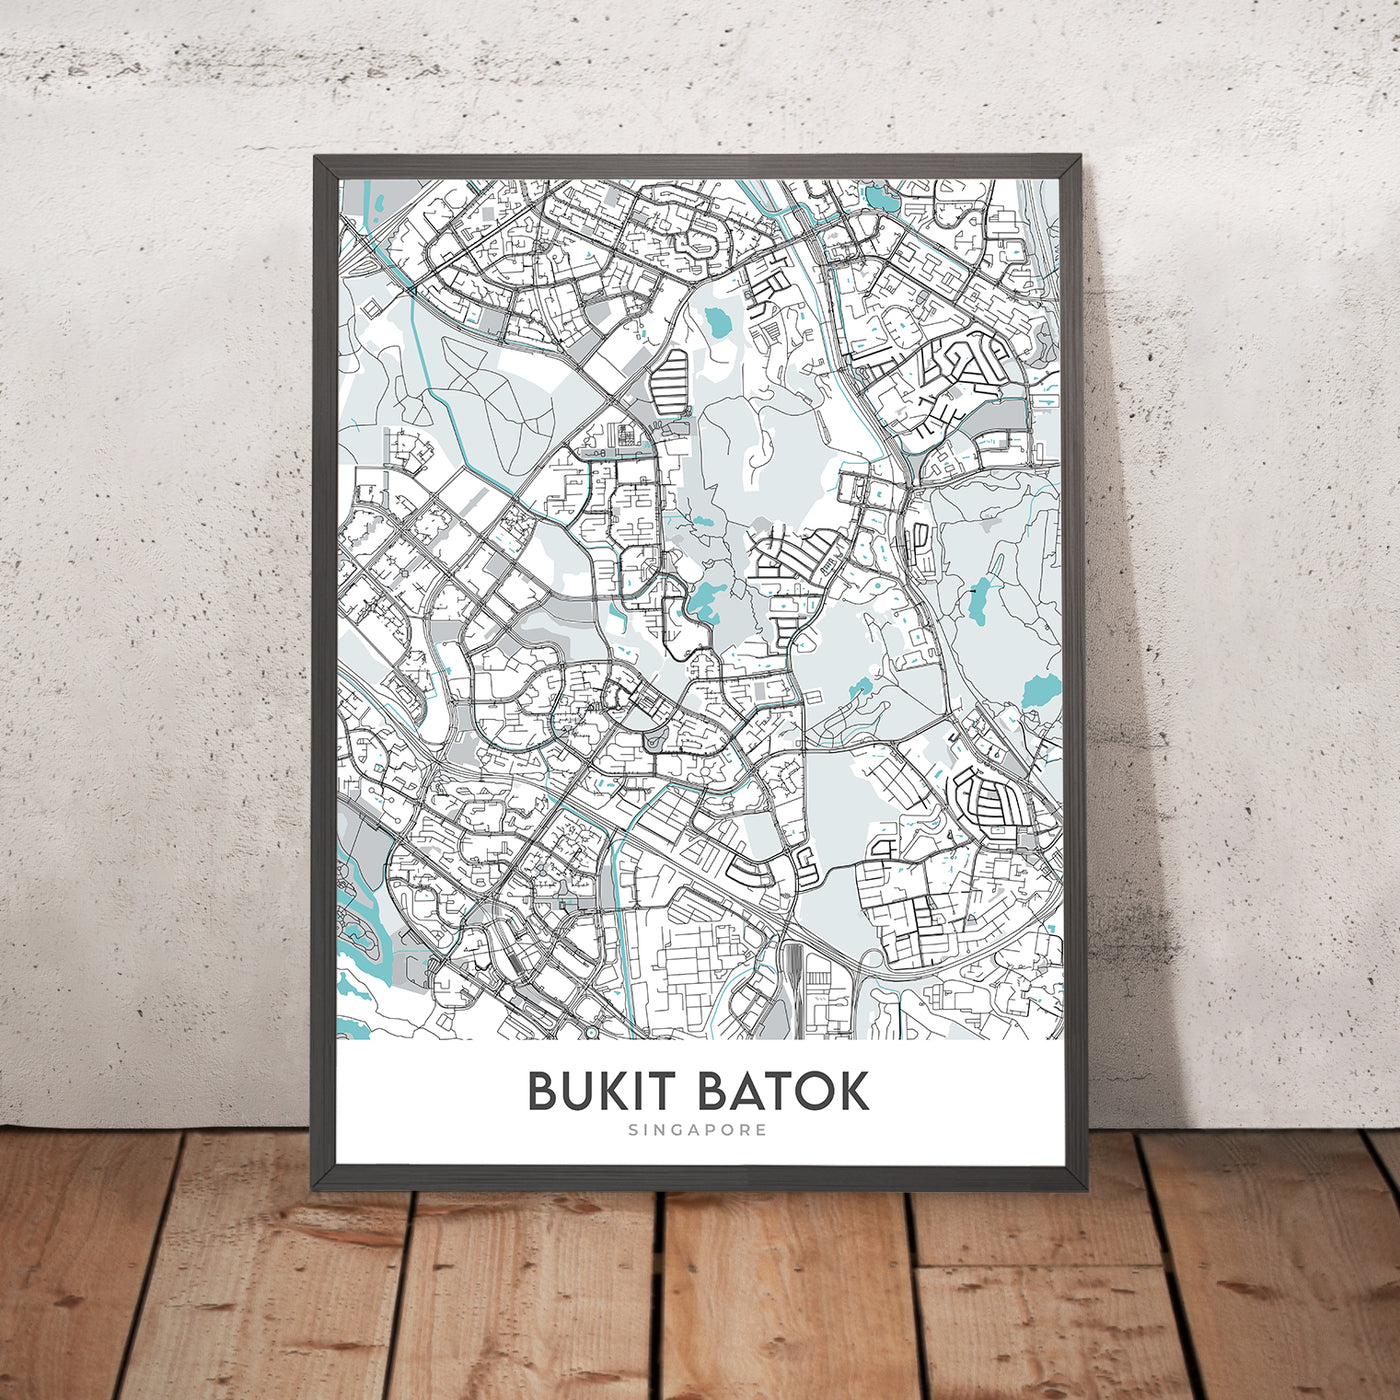 Modern City Map of Bukit Batok, Singapore: Nature Park, Little Guilin, West Mall, Old Ford Motor Factory, Memorial